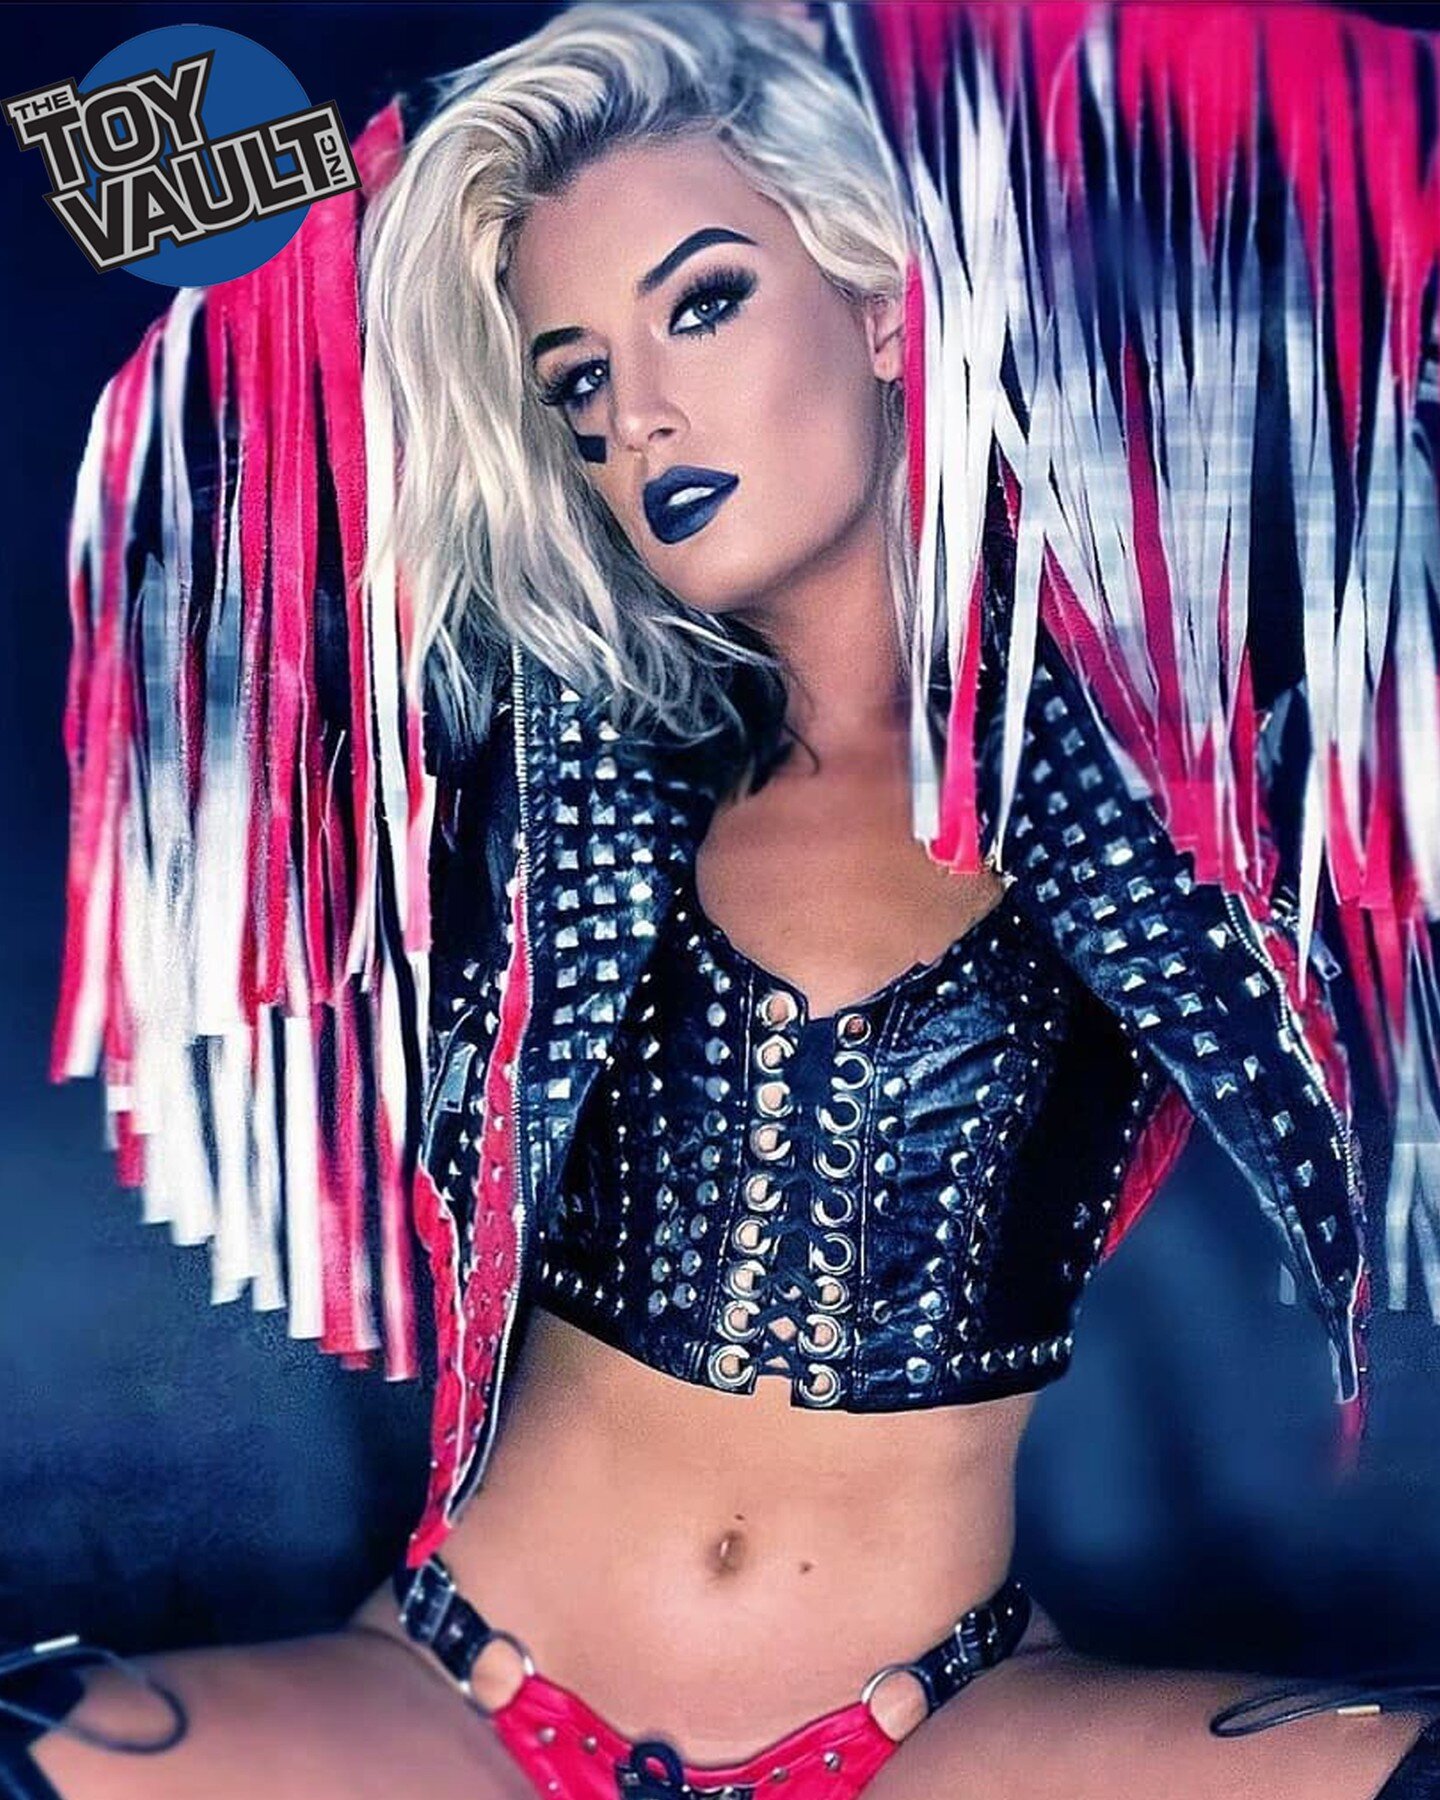 Are you coming out to see @tonistorm_ later this month on Saturday October 22nd?! We will have Toy Vault exclusive 8x10's for just $5 each available for Toni to sign! 

Autographs, Photo Ops, and VIP packages are ON SALE NOW and selling fast over at: